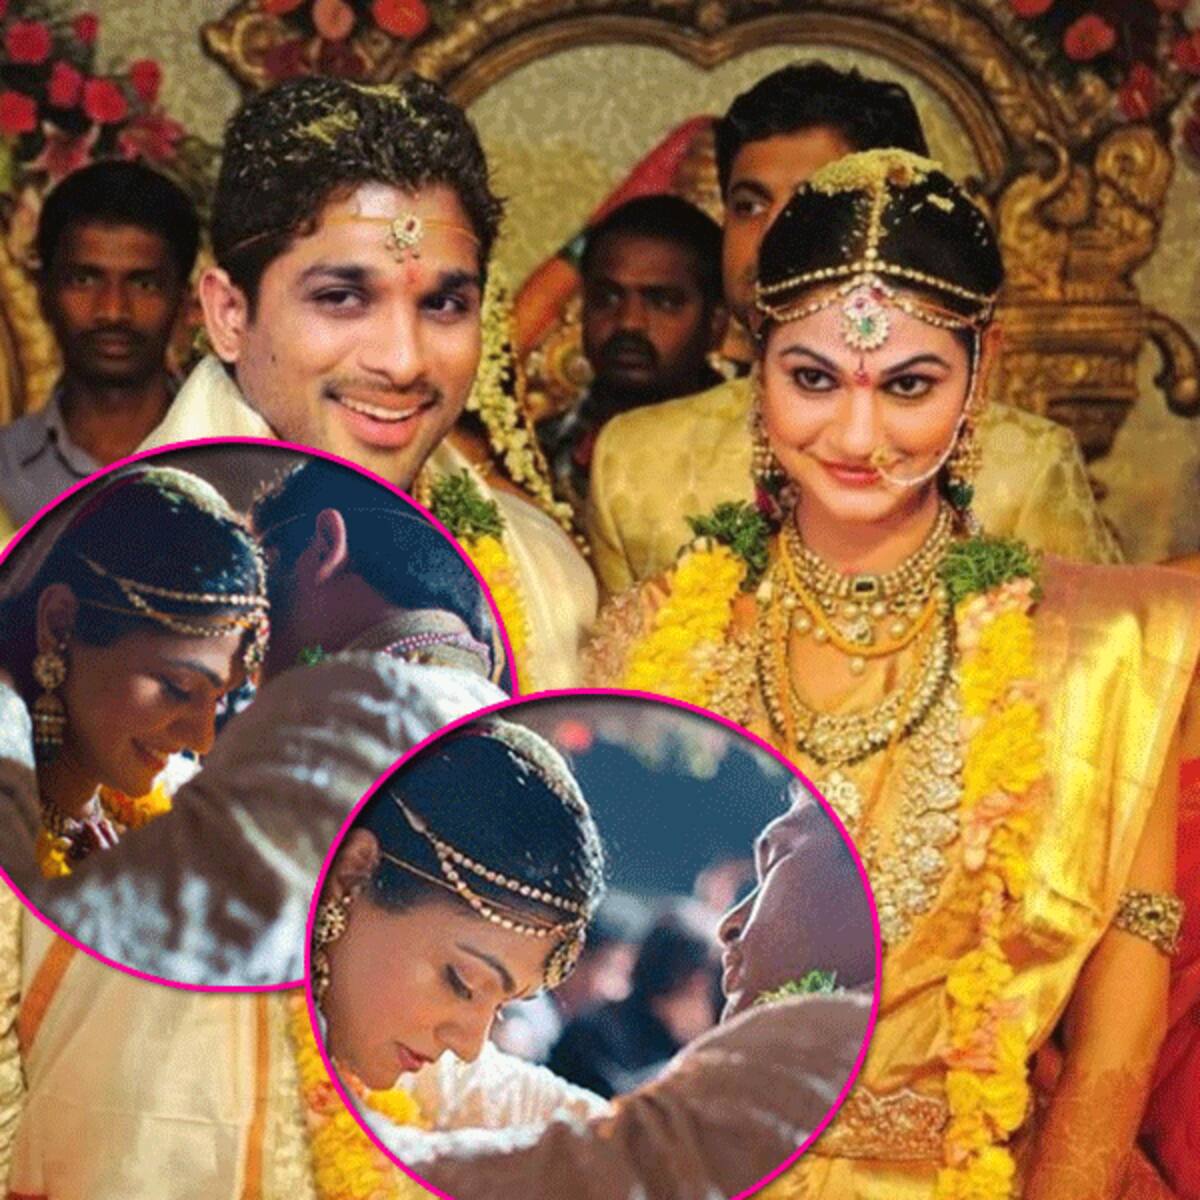 Allu Arjun And Sneha Reddy Wedding Photos Are Straight Out Of A Fairtytale View Pictures Allu arjun made a grand entry with his spouse sneha to the engagement ceremony of his cousin niharika konidela held on thursday. allu arjun and sneha reddy wedding